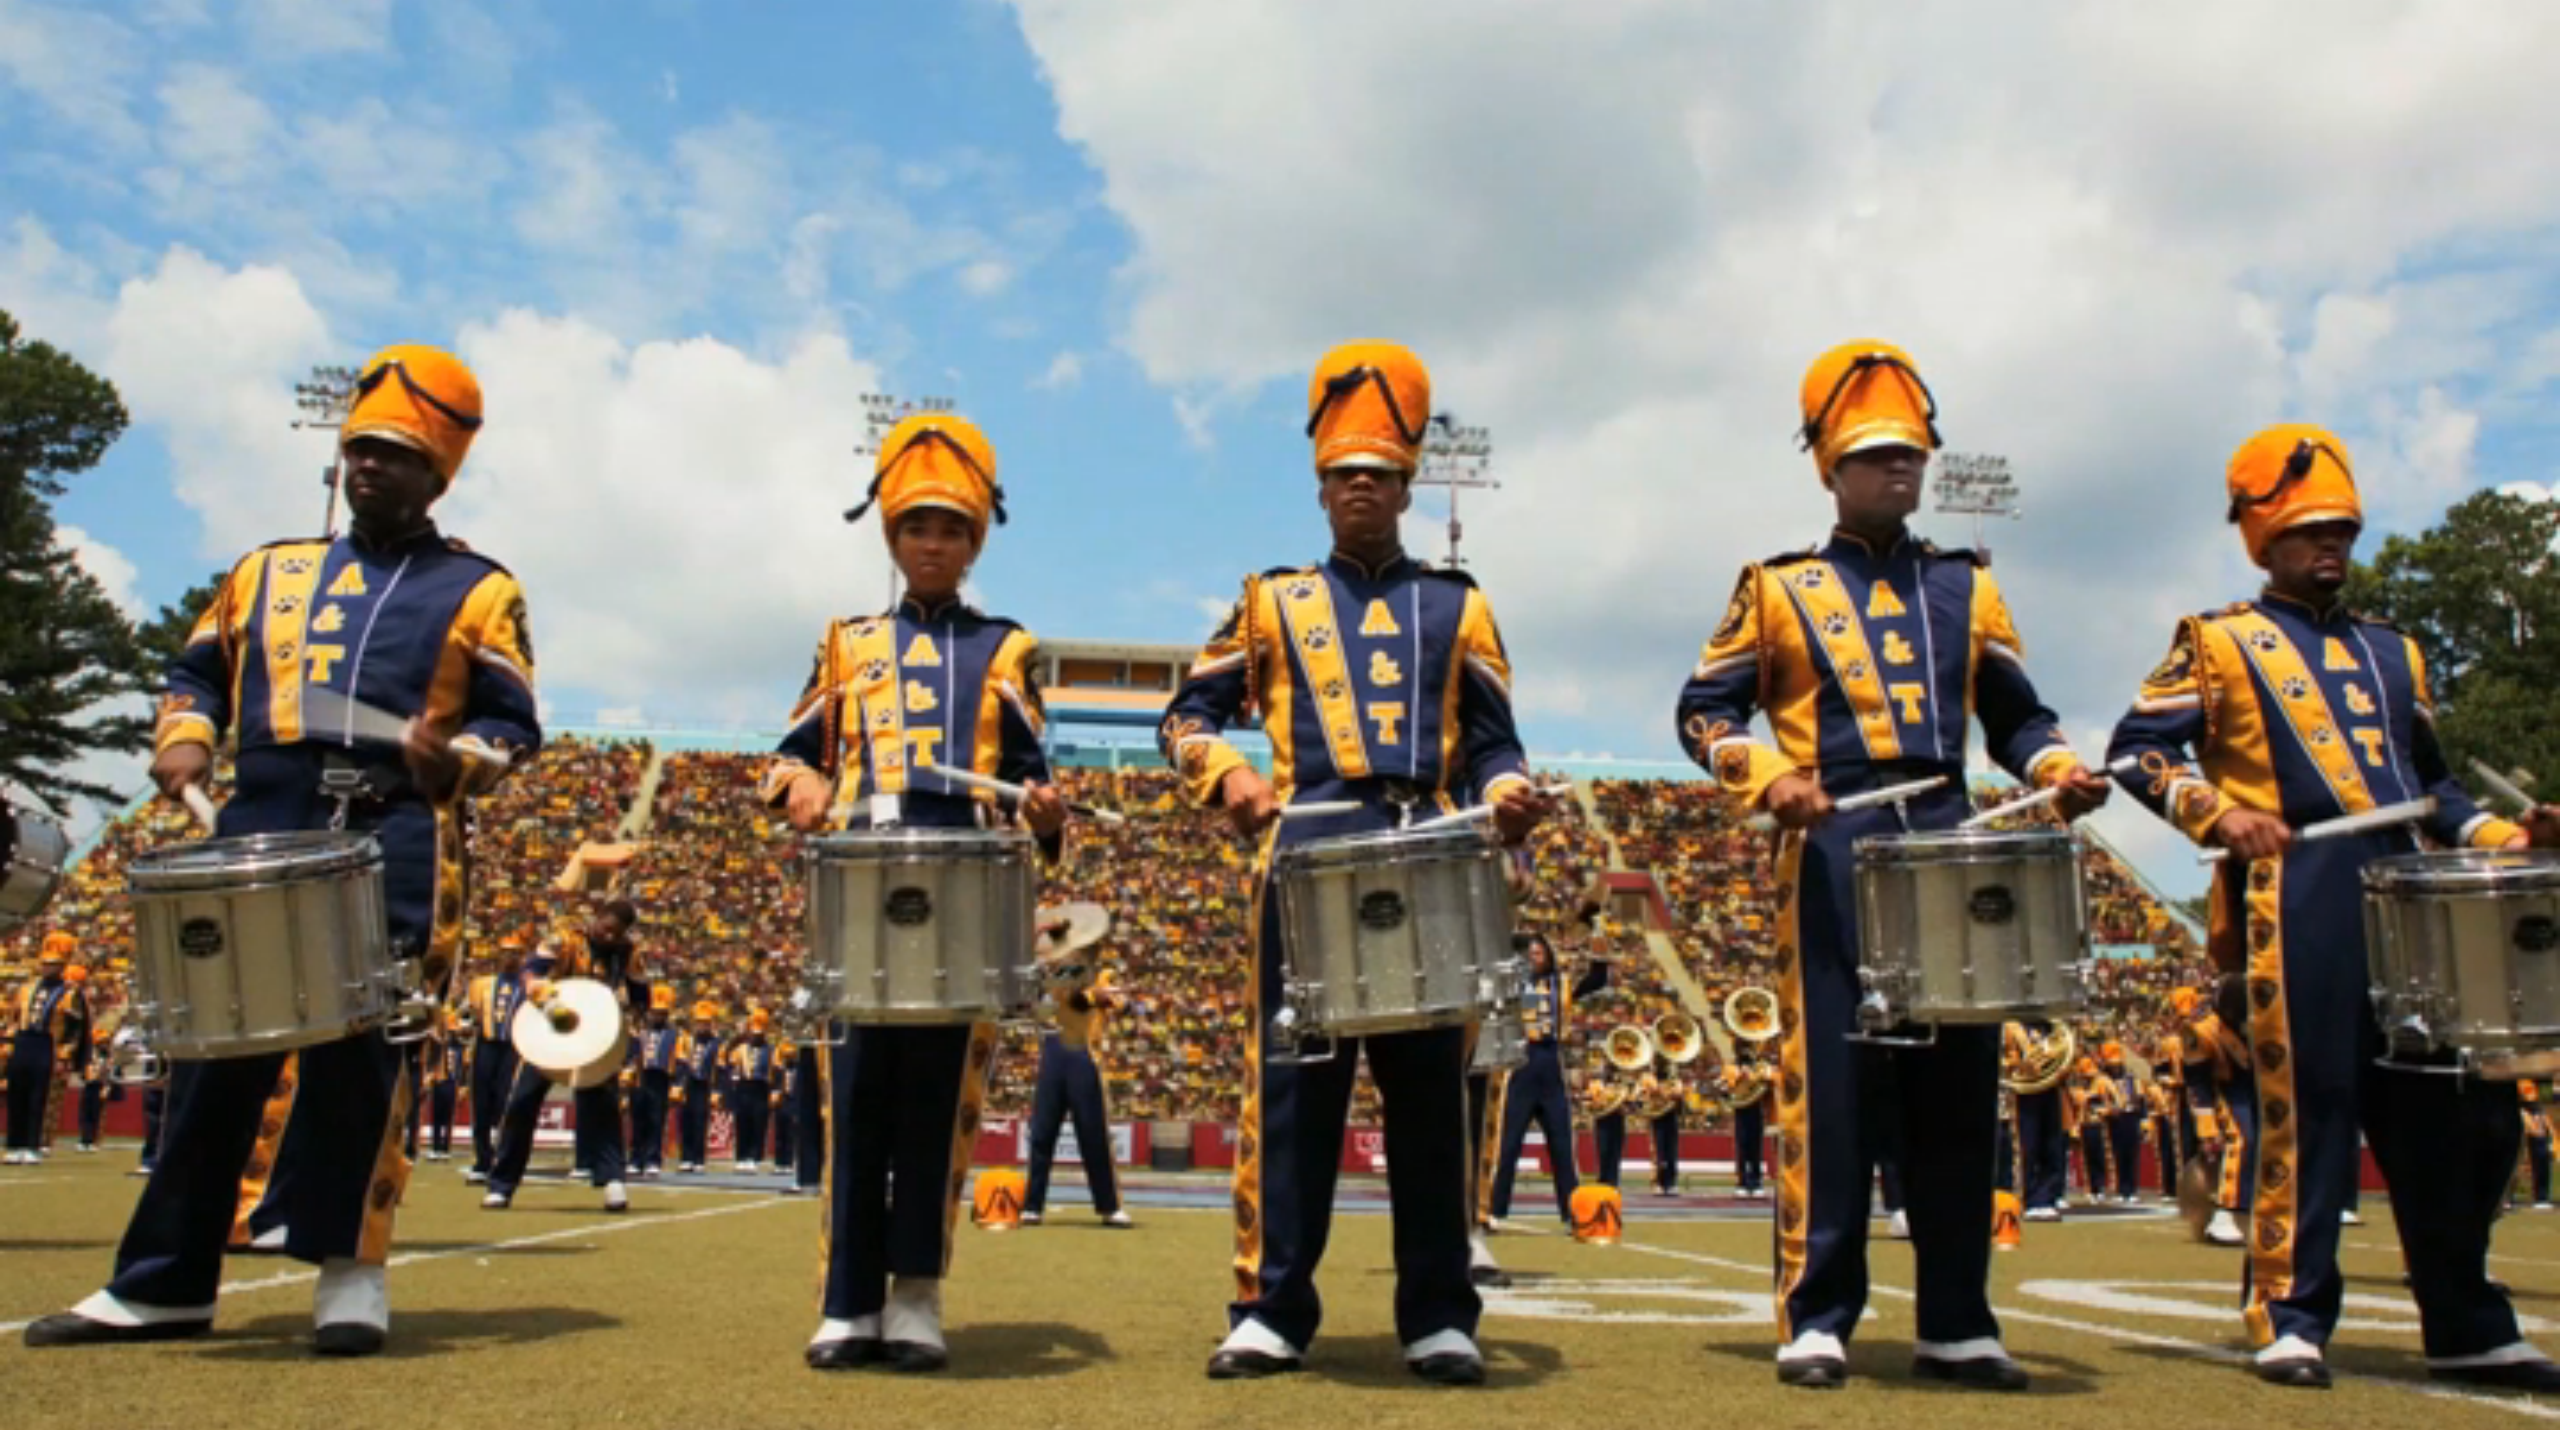 Nick & Drumline: A New Beat Cast Talks About Importance of the Film